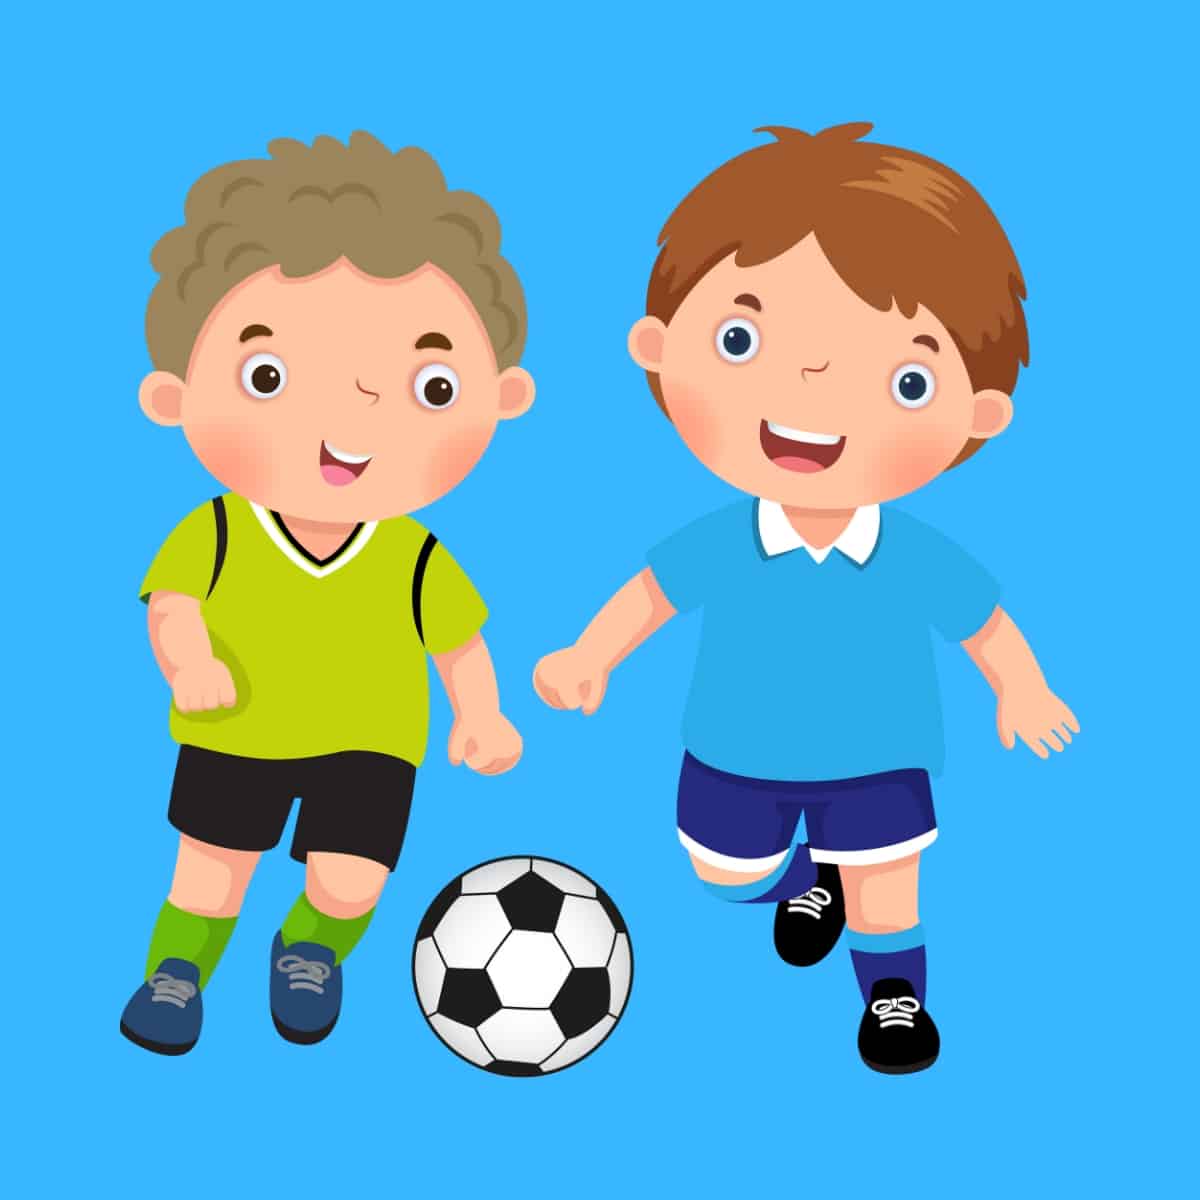 Cartoon graphic of two boys kicking a soccer ball on blue background.